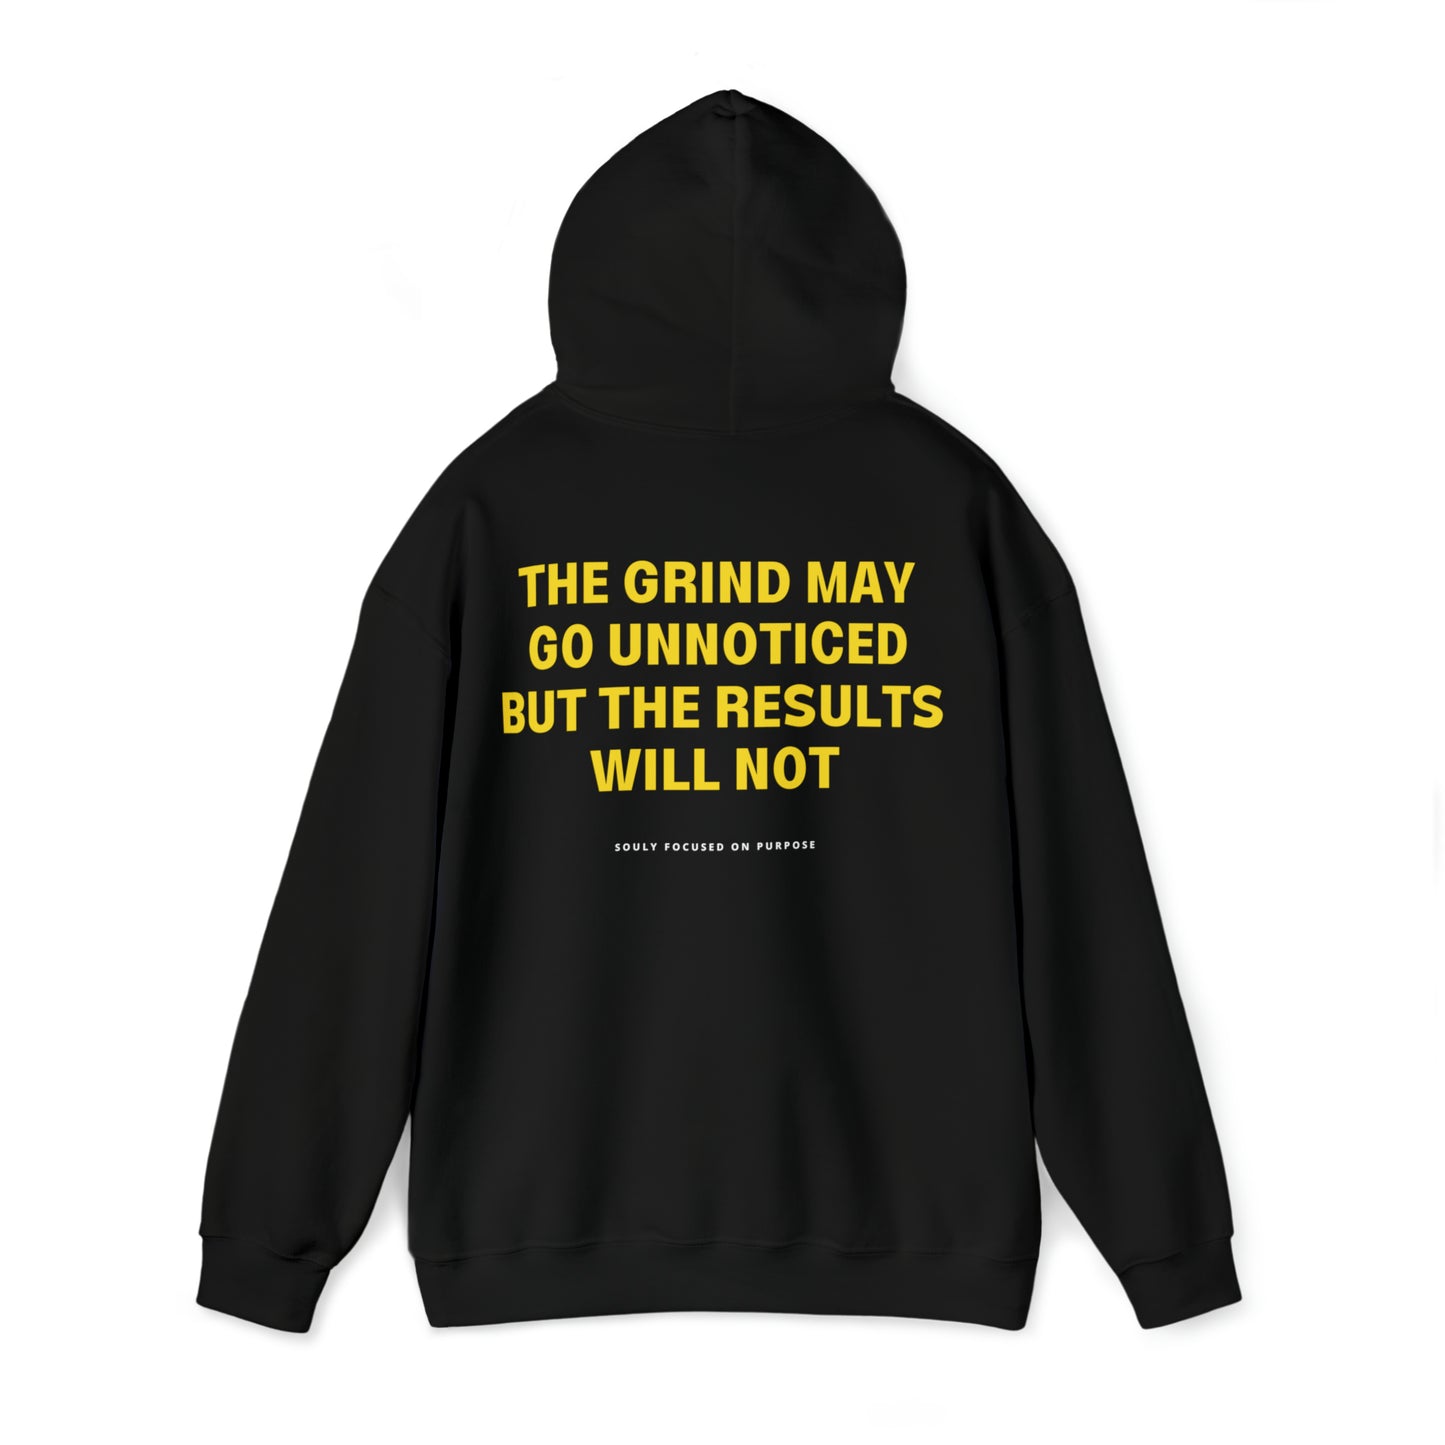 The Grind May Go Unnoticed But The Results Will Not Hoodie